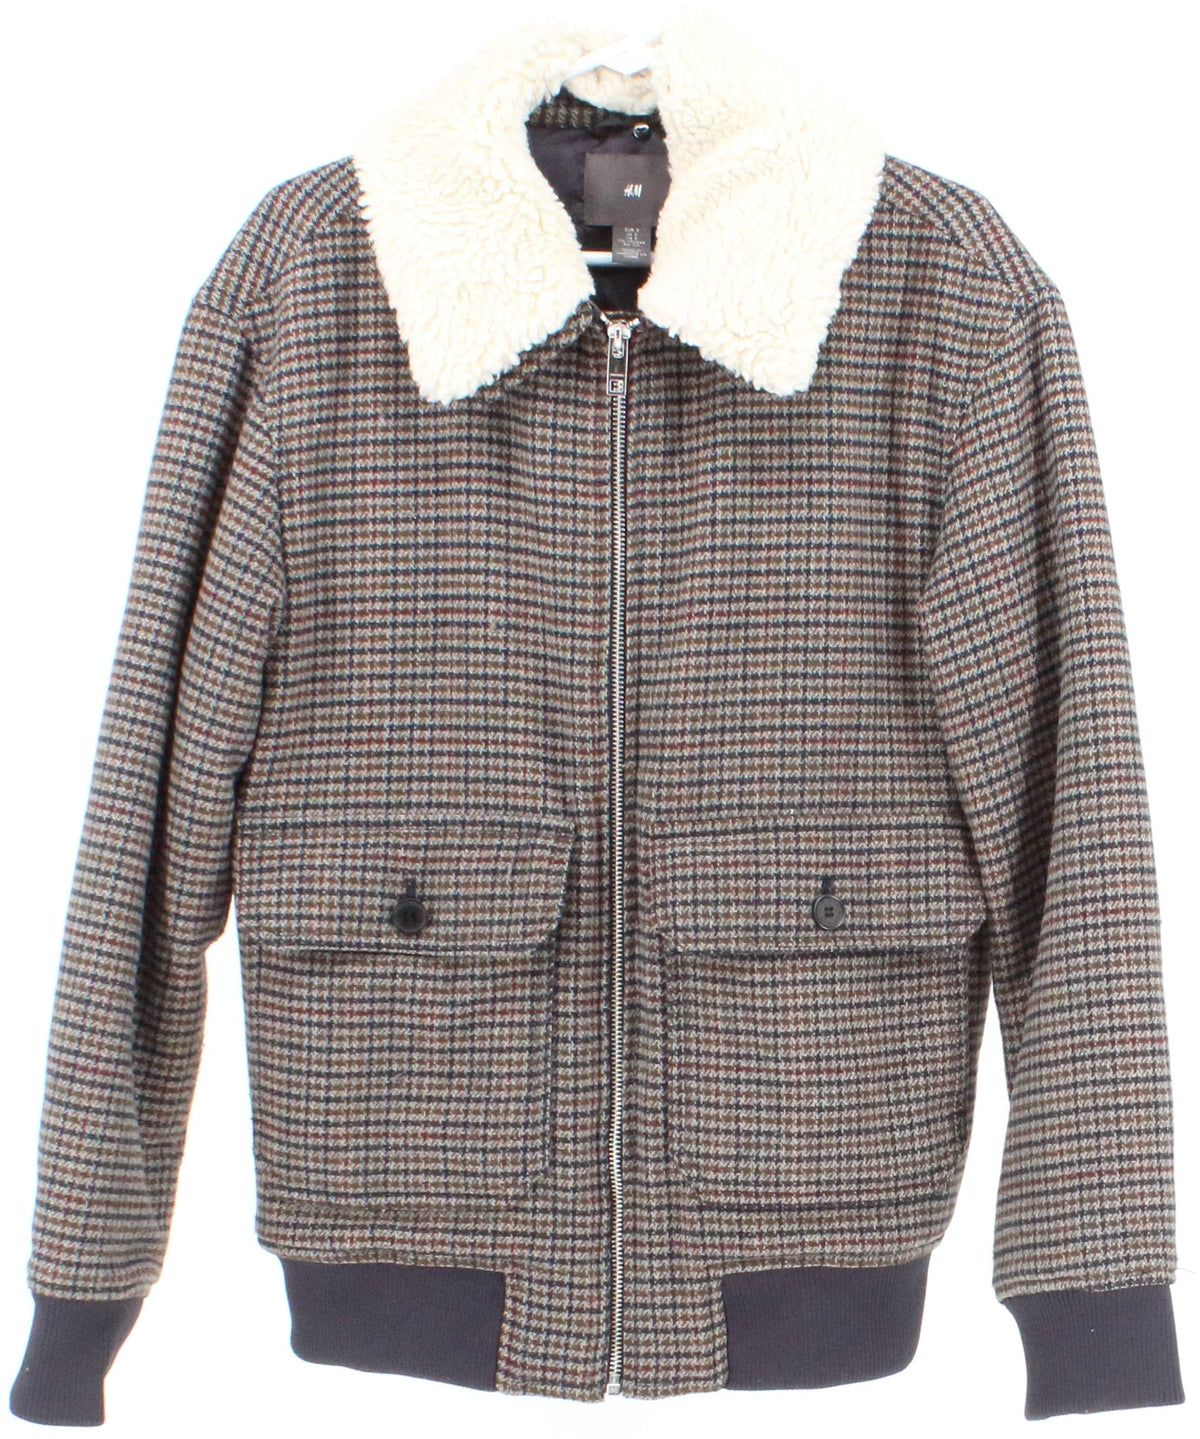 H&M Navy Blue and Brown Plaid Jacket With Sherpa Collar